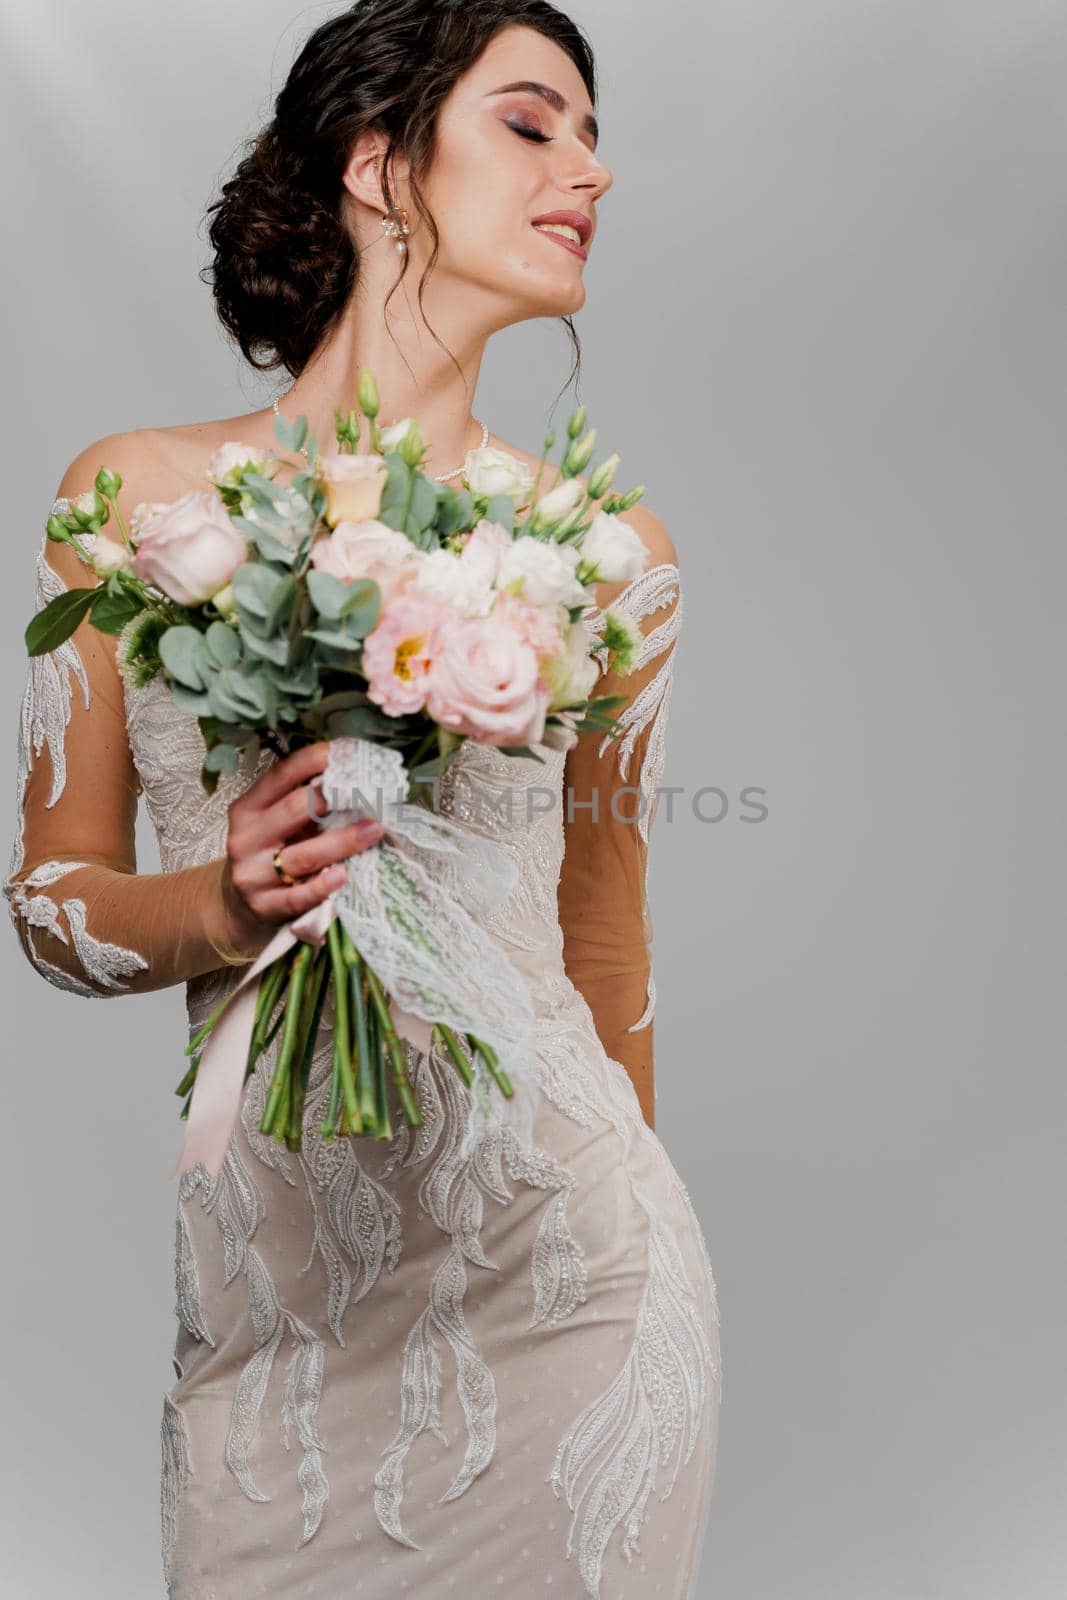 Bride with wedding bouquet looks right side. Attractive girl vertical portrait for social networks. Girl in wedding gown on blank background. by Rabizo